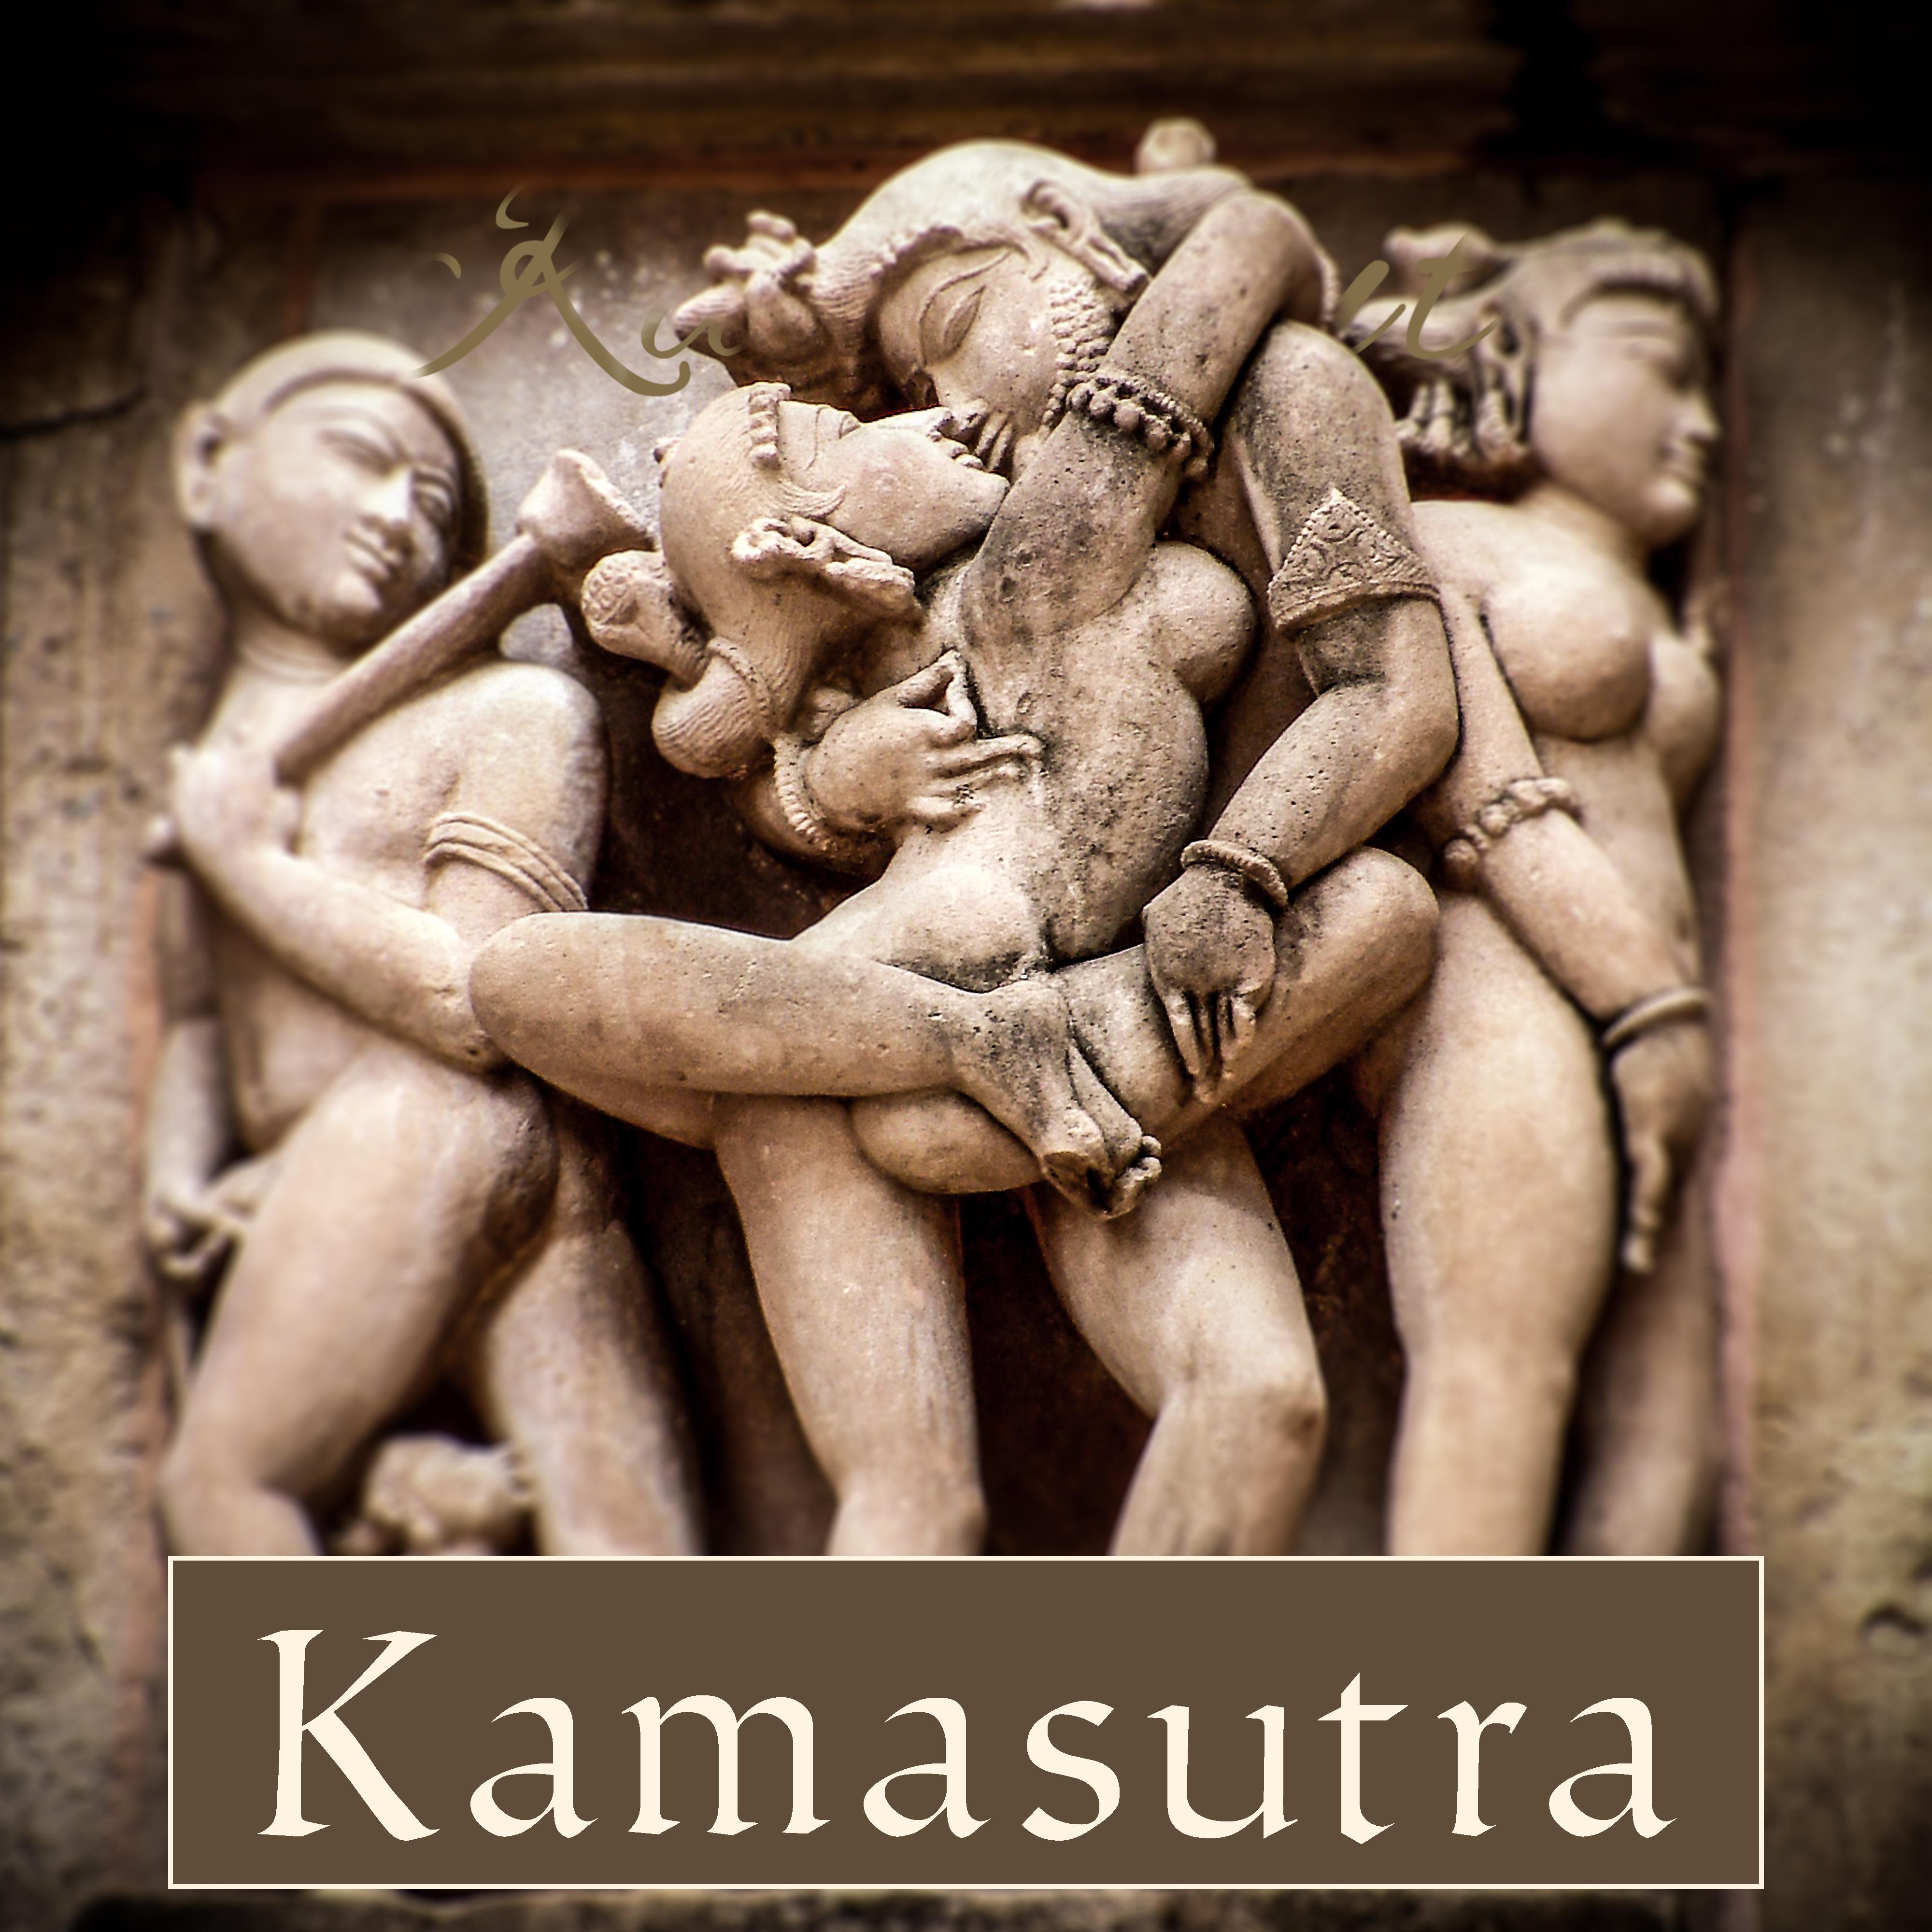 Kamasutra  Erotic Music for , Tantric Massage, Fancy Games, Getting Close, Making Love, Deep Orgasm, Chill Out